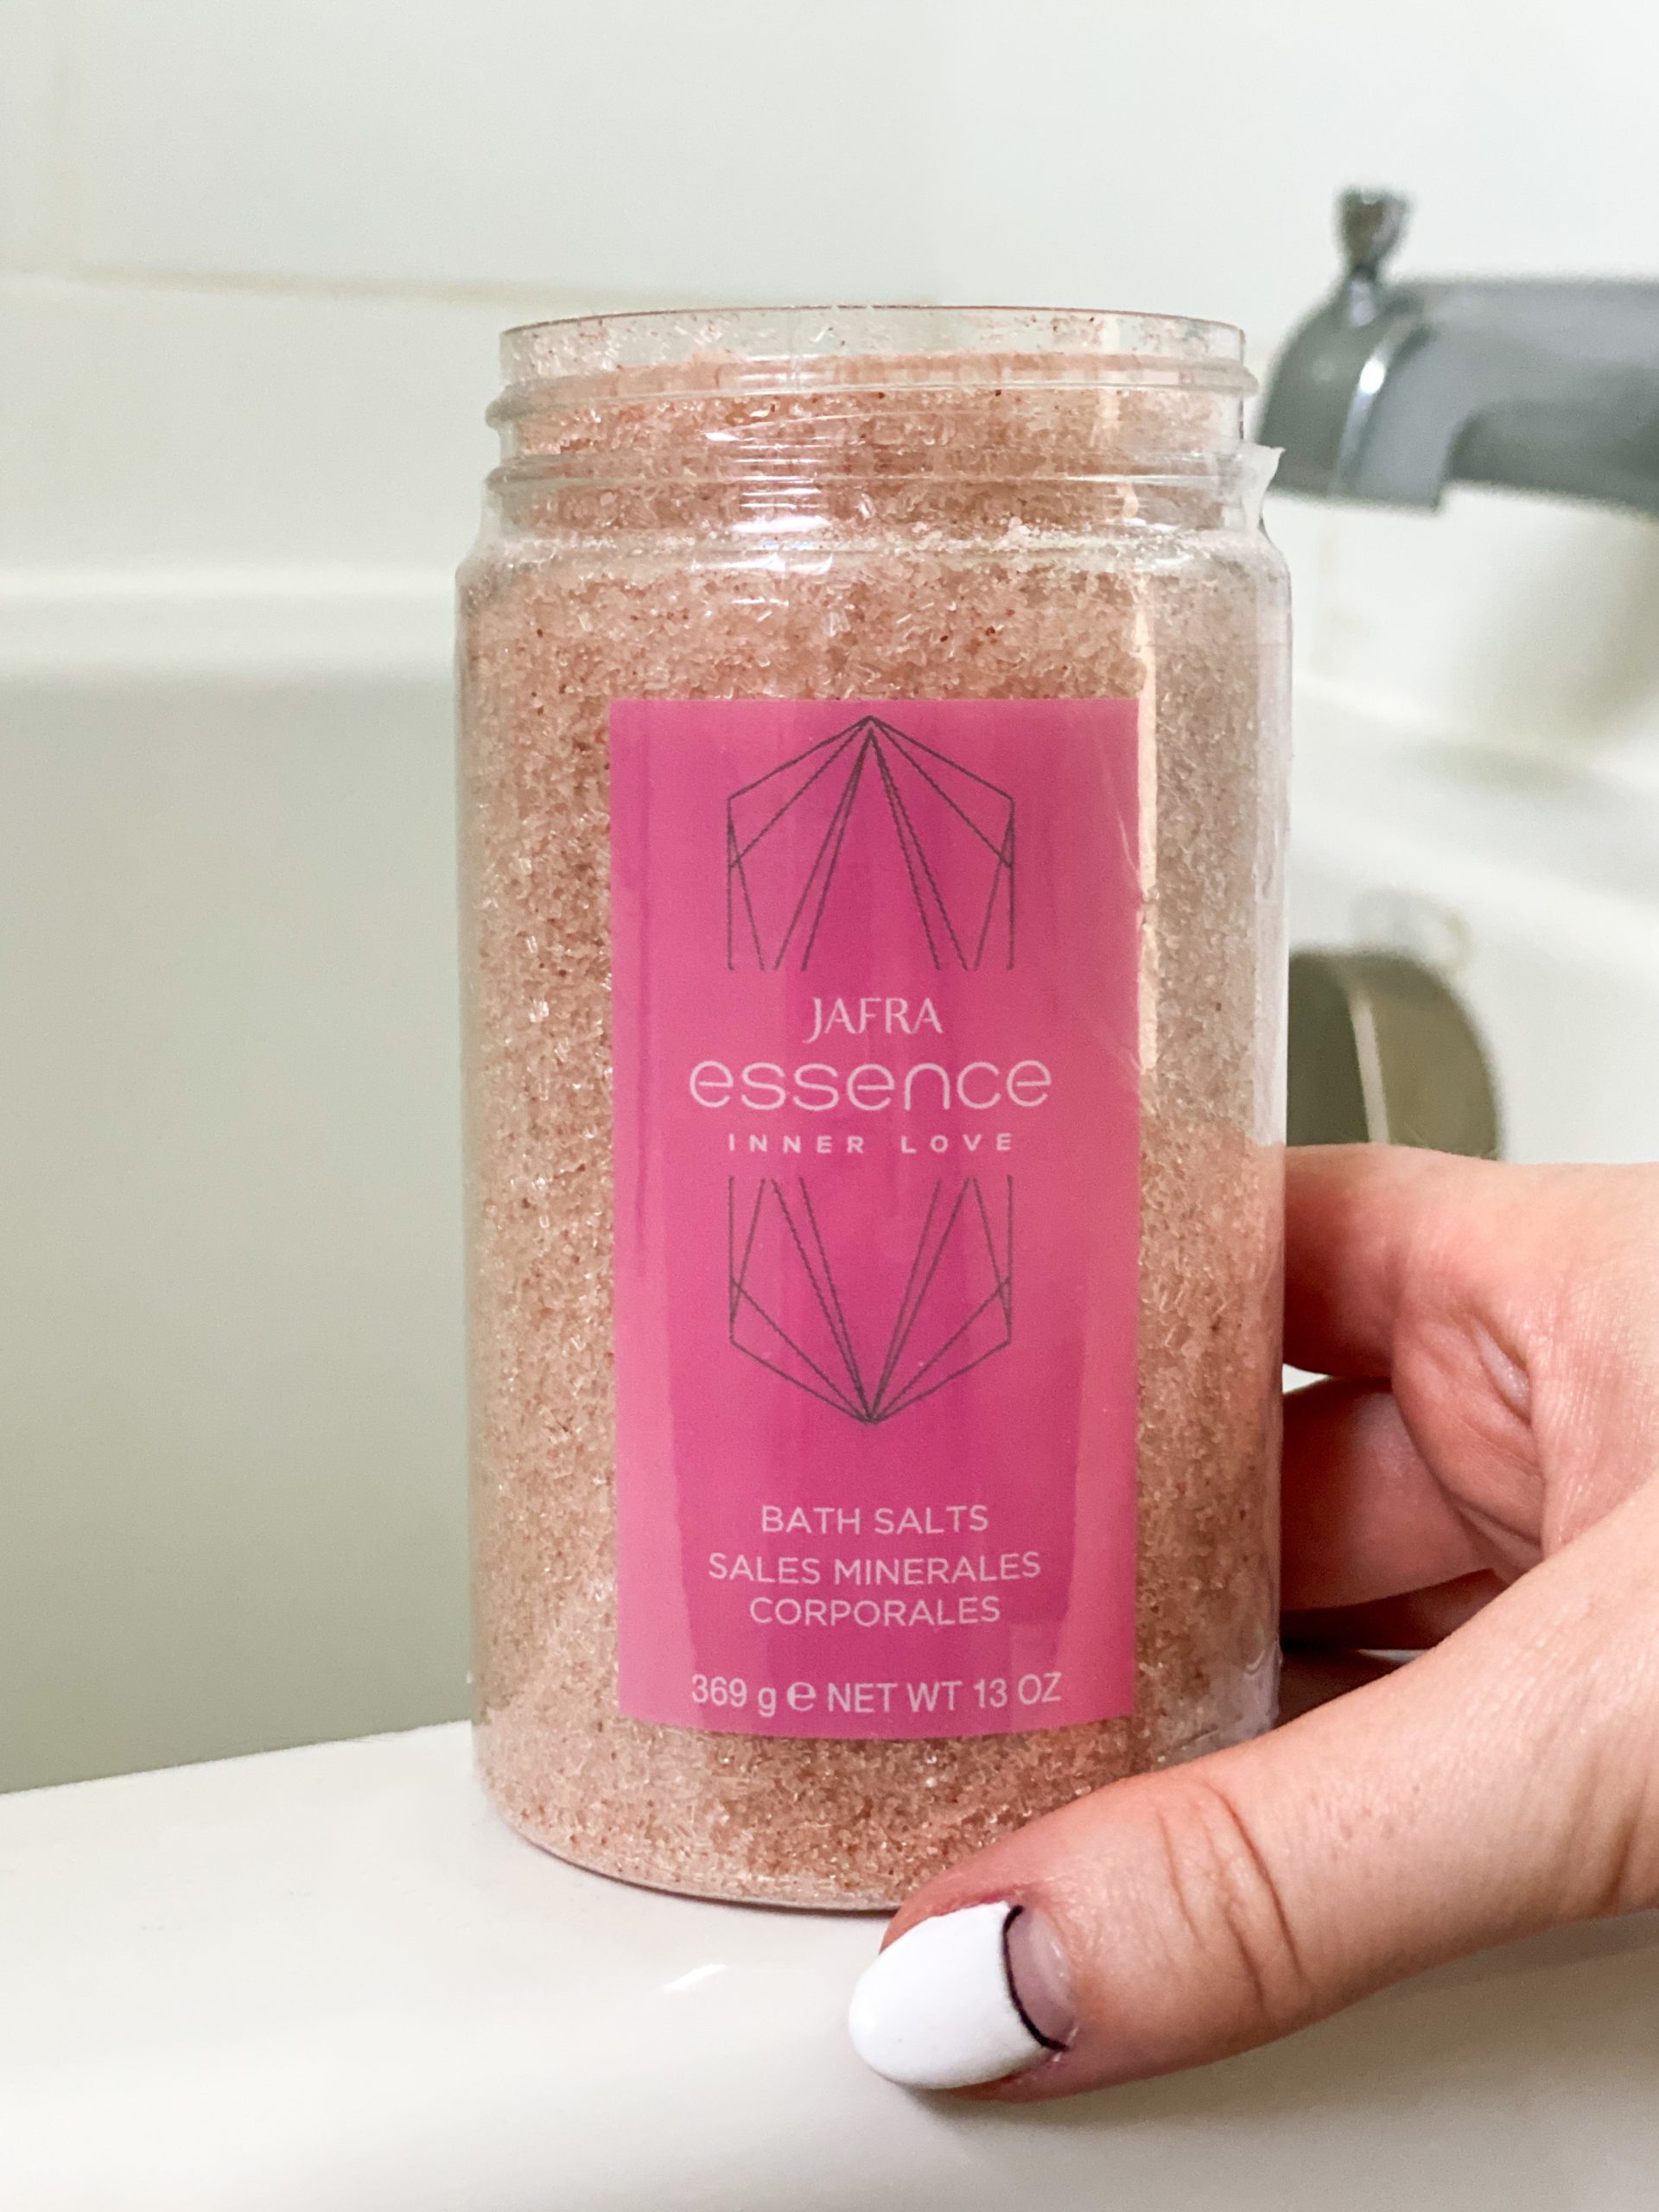 Jafra Essence Bath Salts two new body products